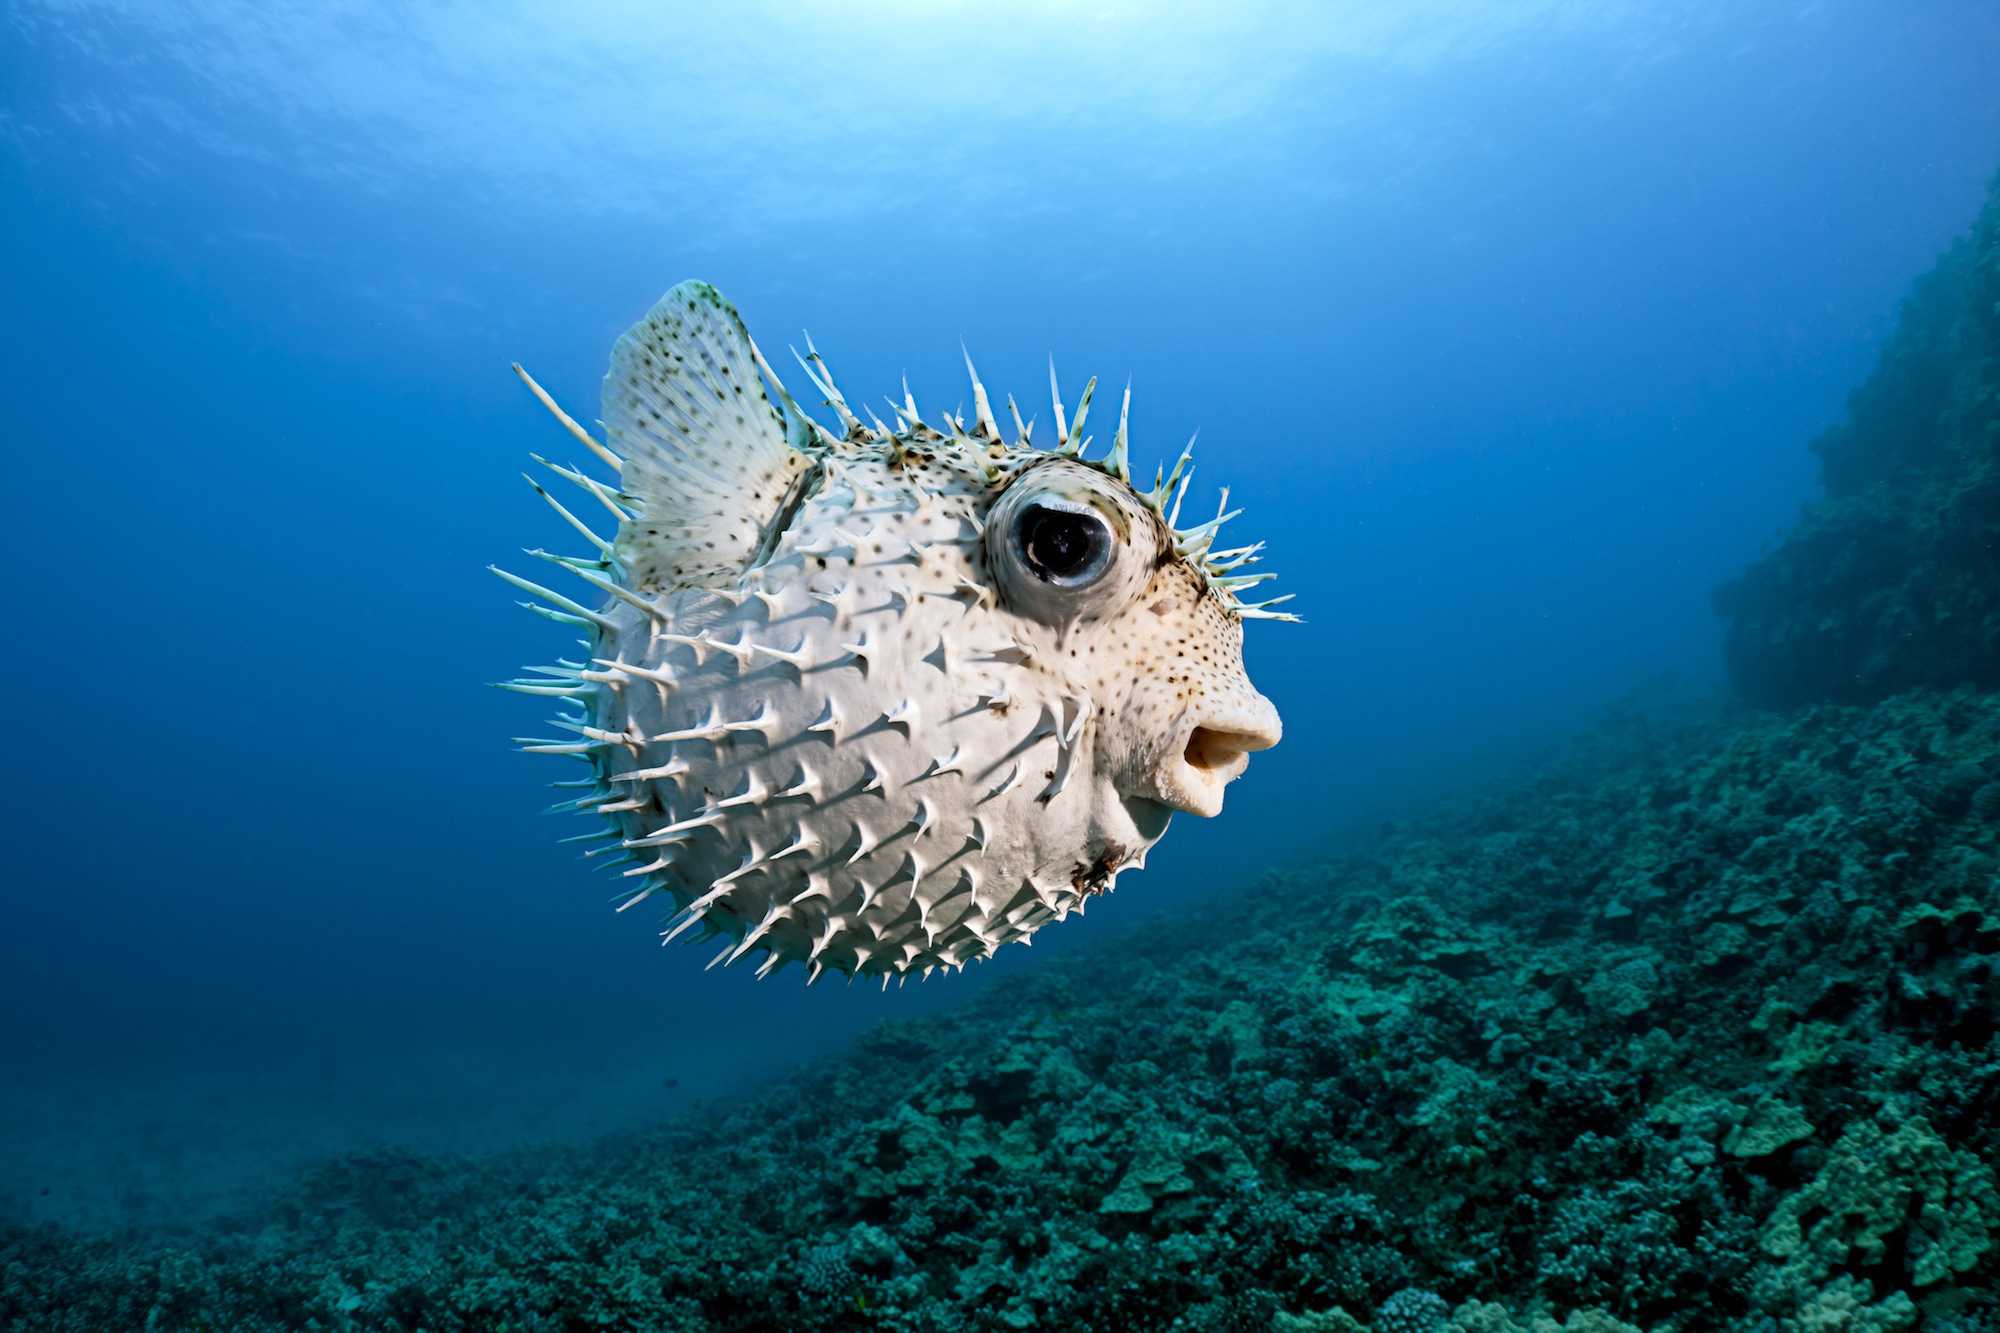 A spotted porcupinefish